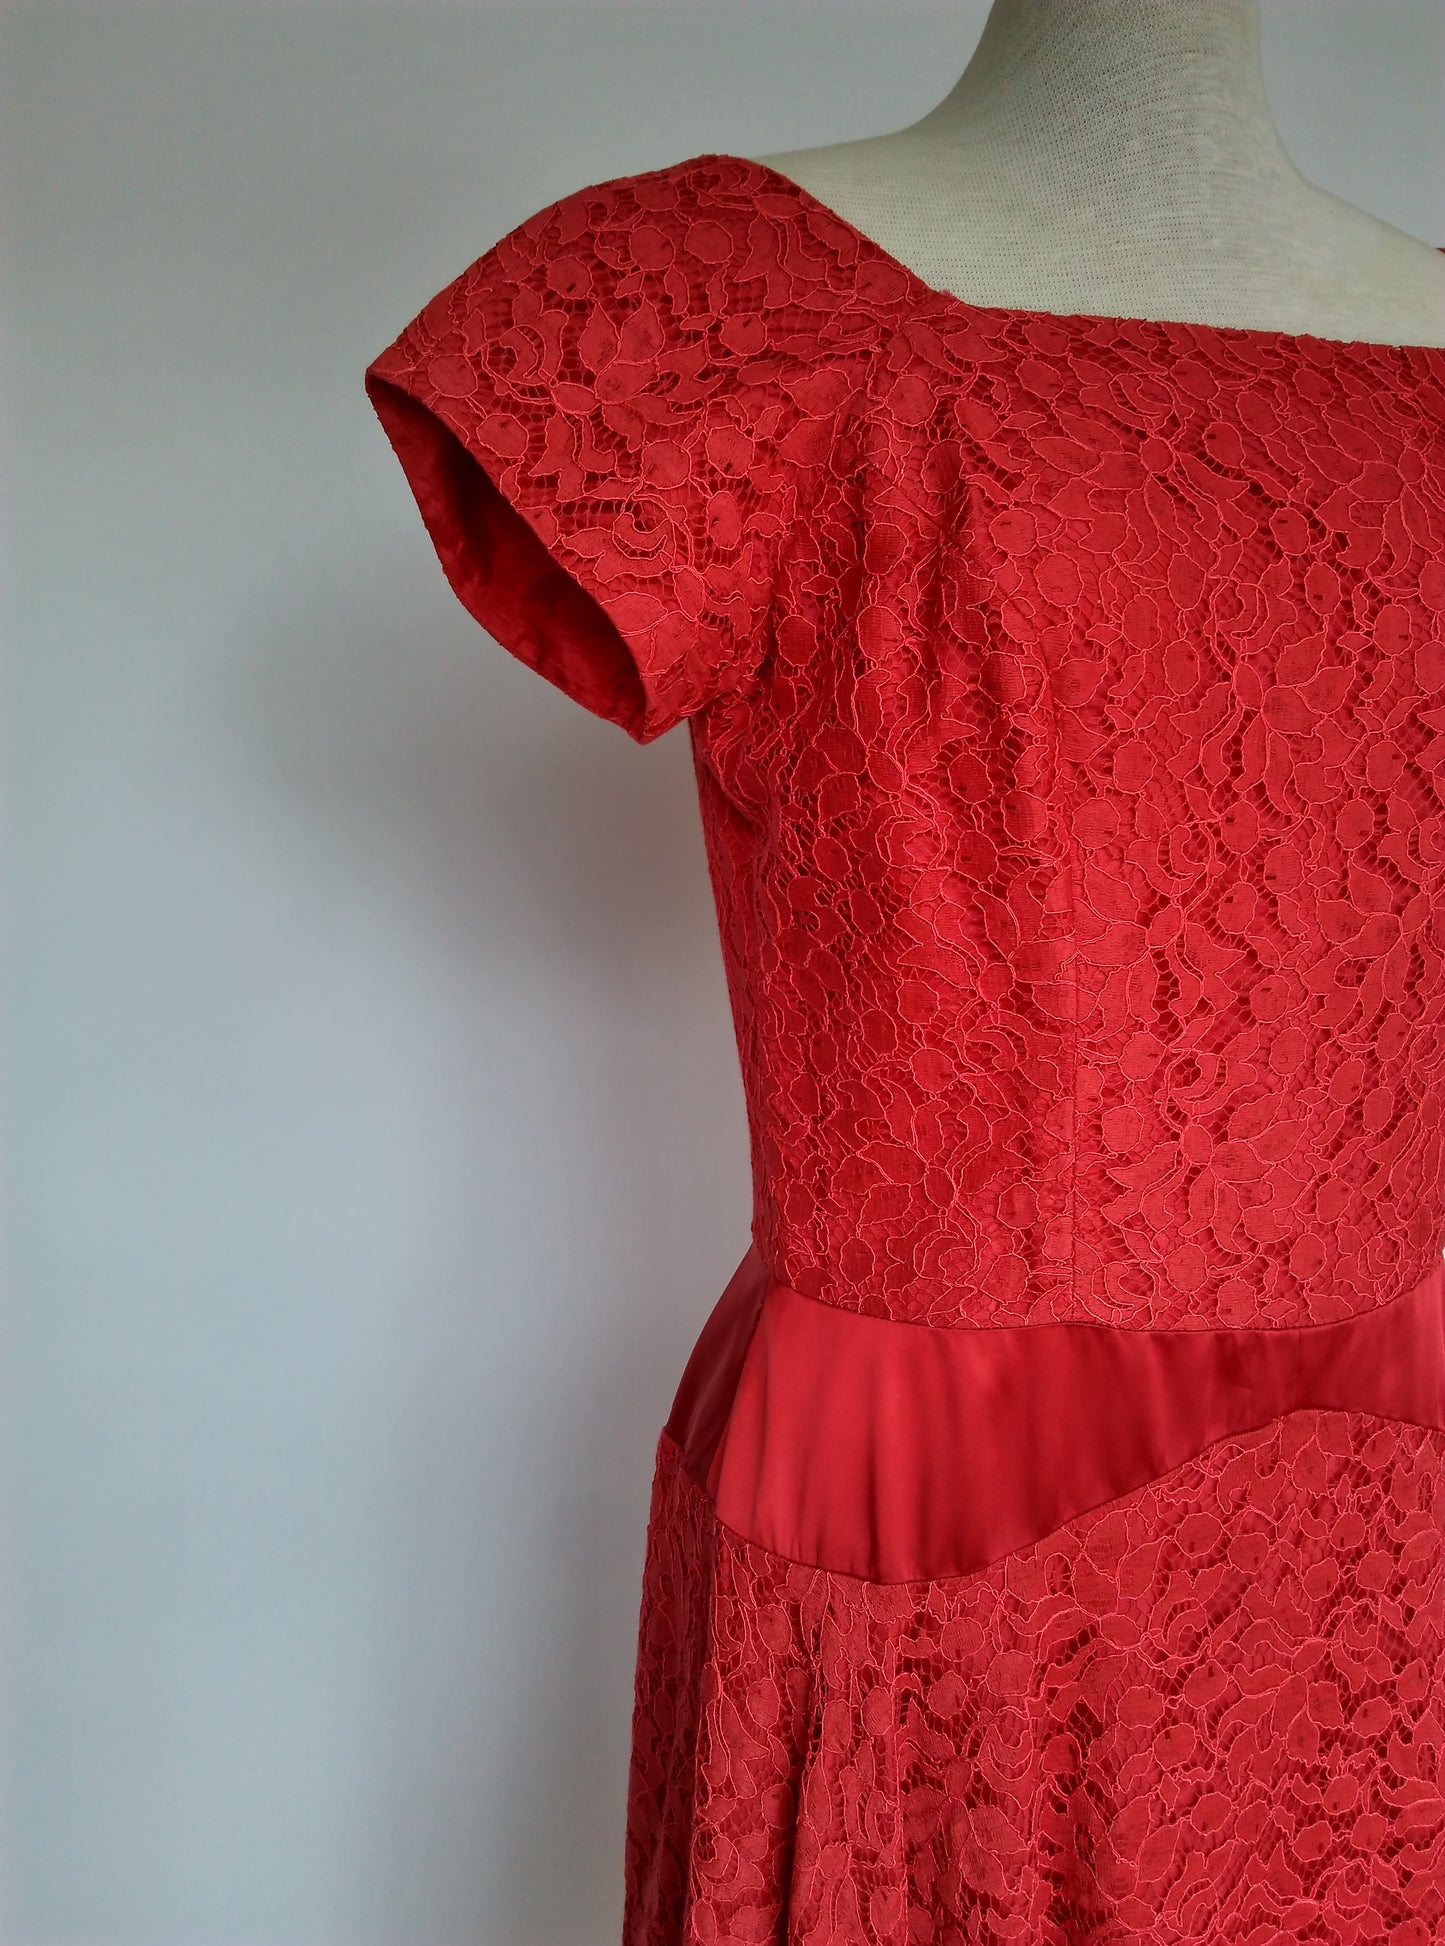 Red Lace Dress 1950s